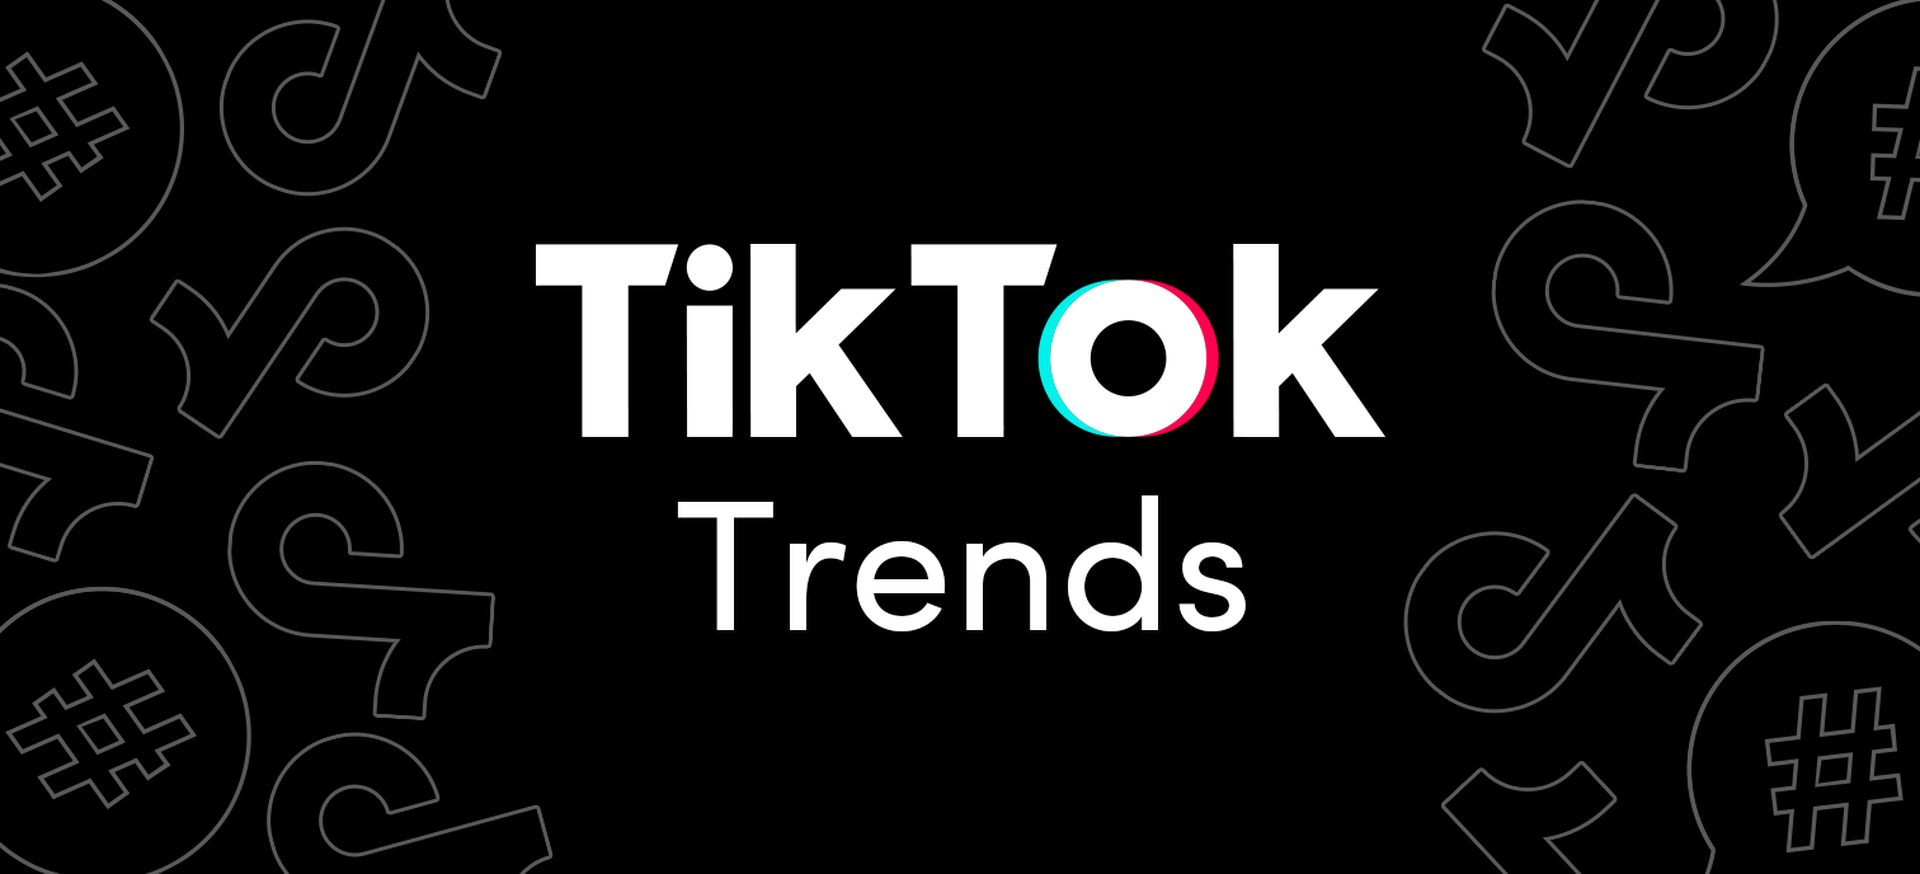 Tiktok F47 Trend Meaning How To Do The F47 Trend • Techbriefly